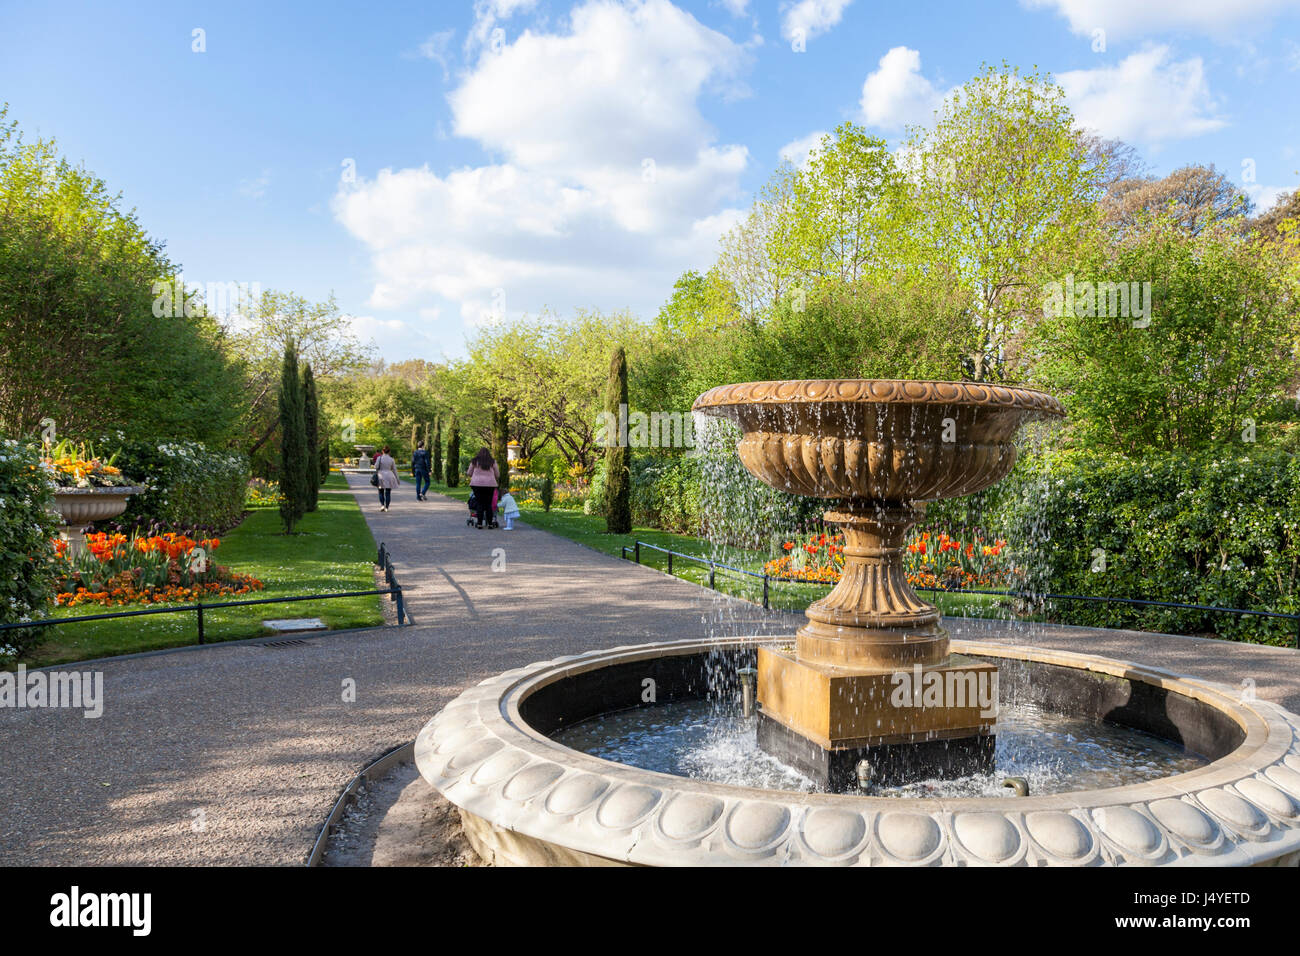 Fountain, trees and flowers in Spring at Avenue Gardens at Regents Park, London, England, UK Stock Photo